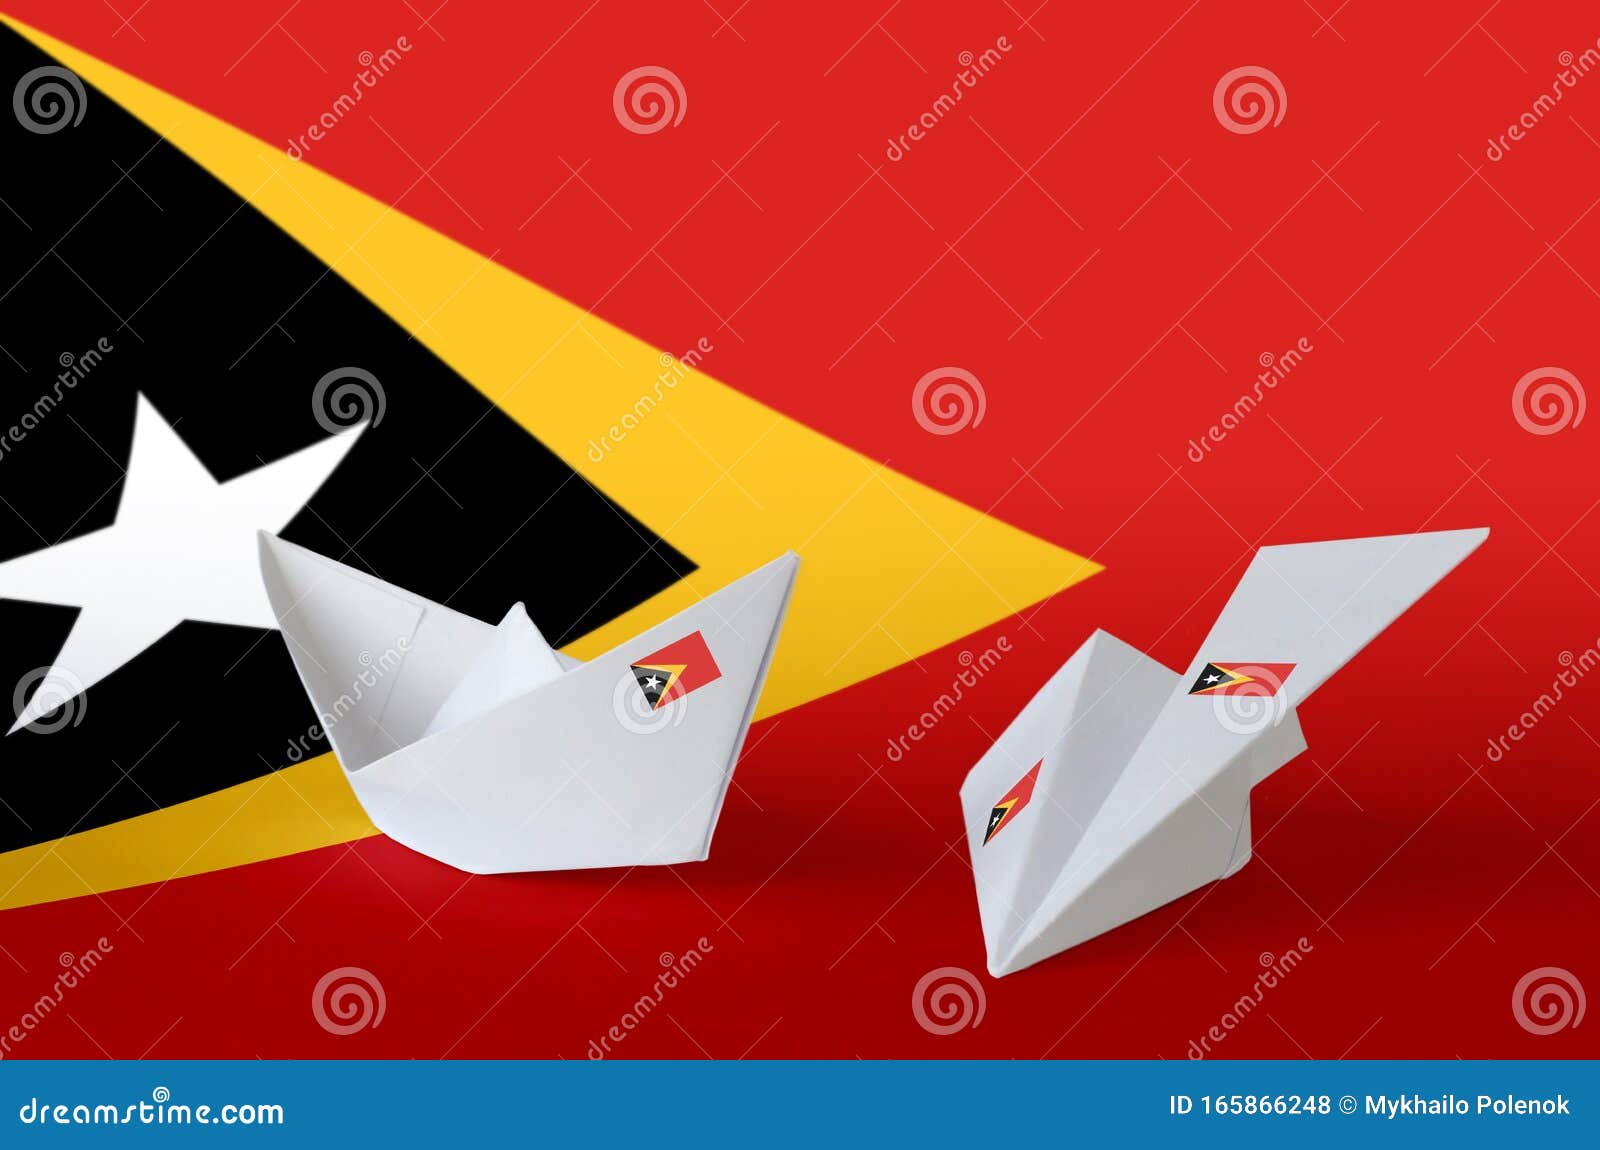 timor leste flag depicted on paper origami airplane and boat. handmade arts concept